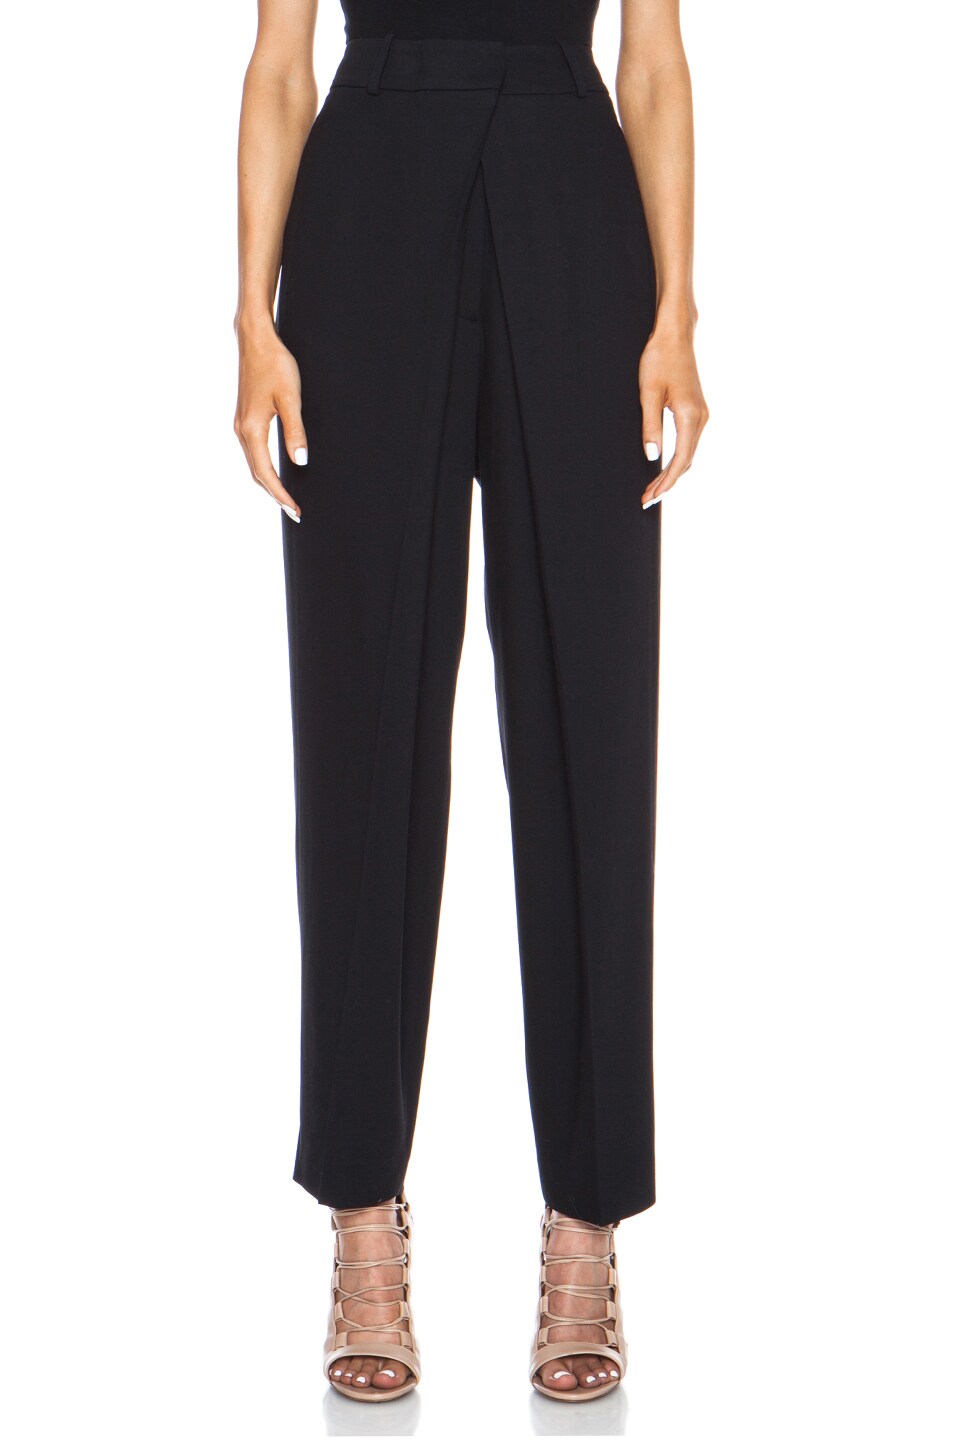 Image 1 of McQ Alexander McQueen Front Pleat Rayon-Blend Trouser in Deep Black